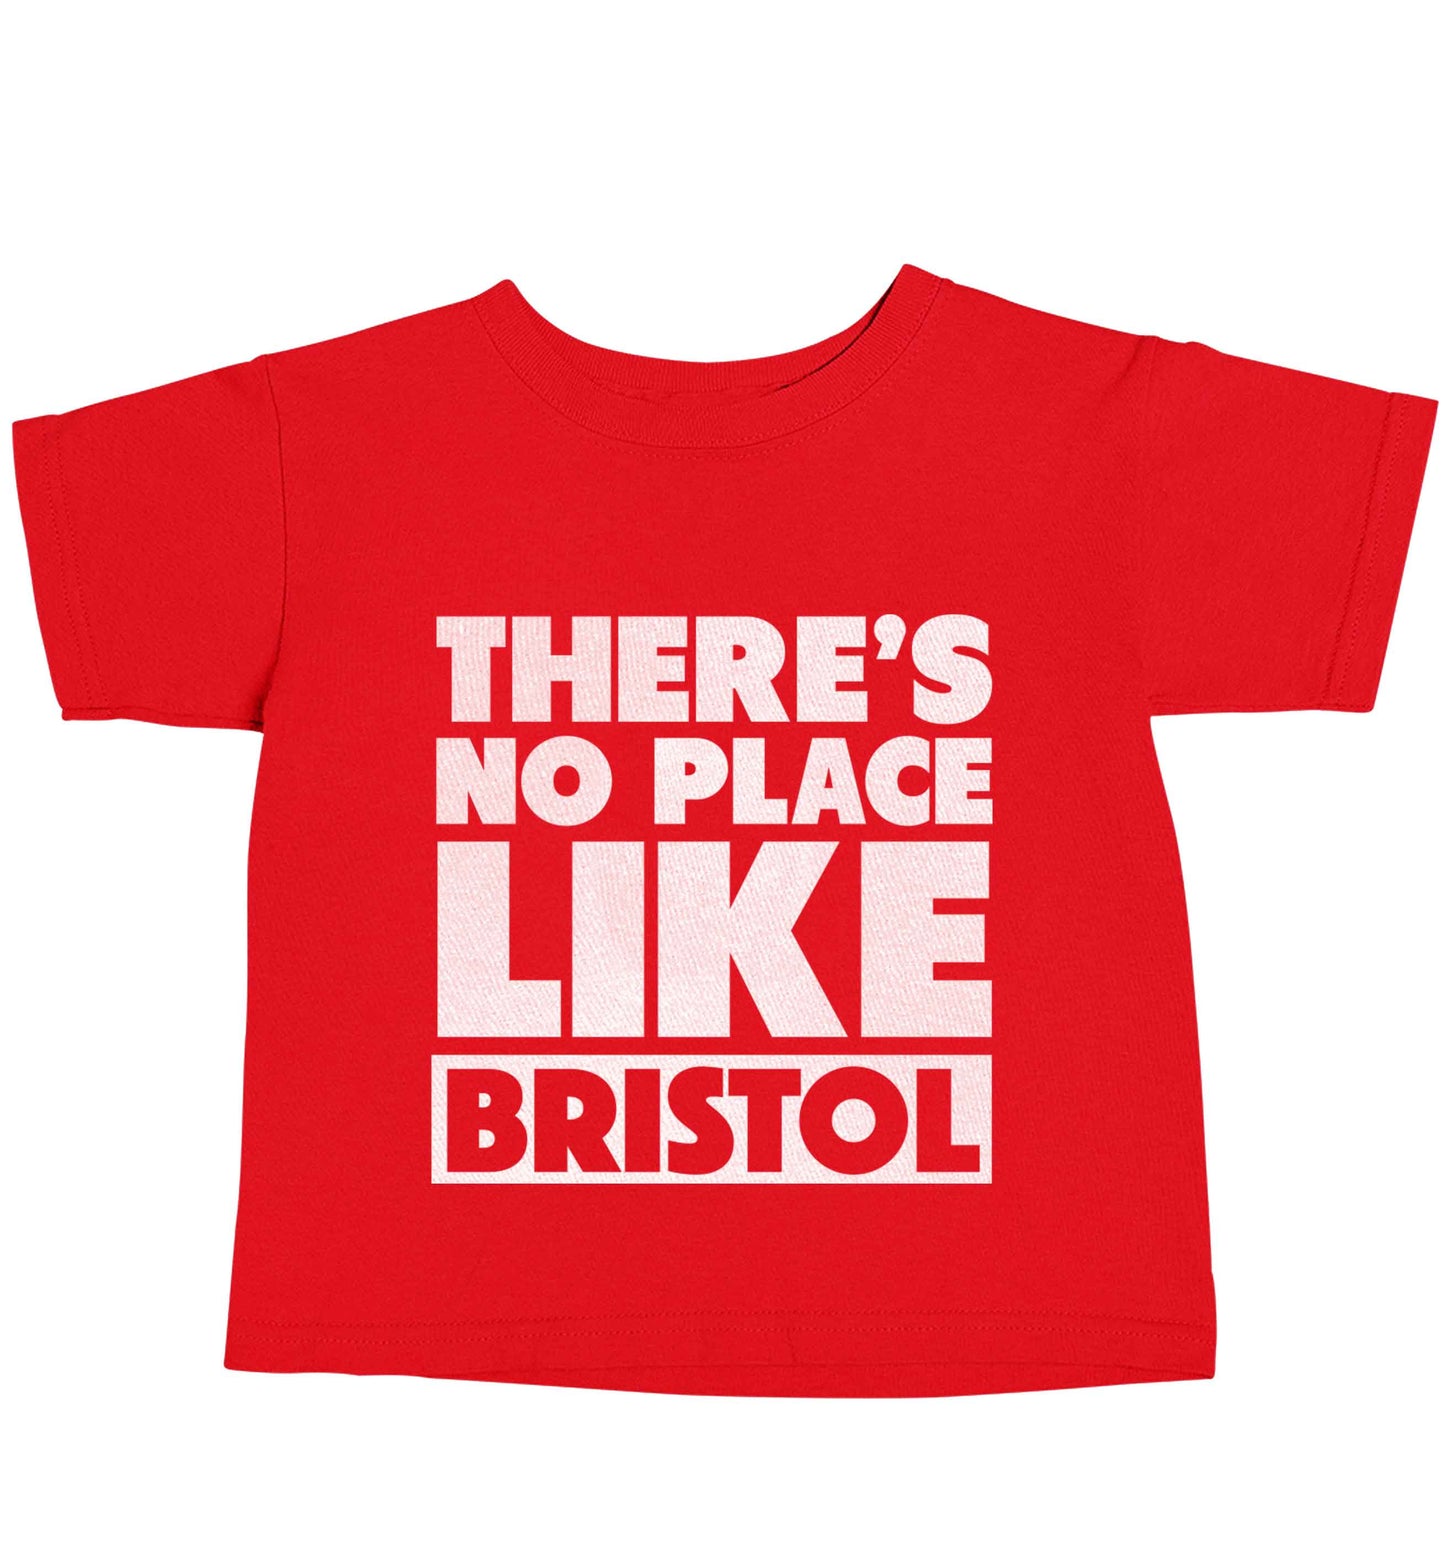 There's no place like Bristol red baby toddler Tshirt 2 Years